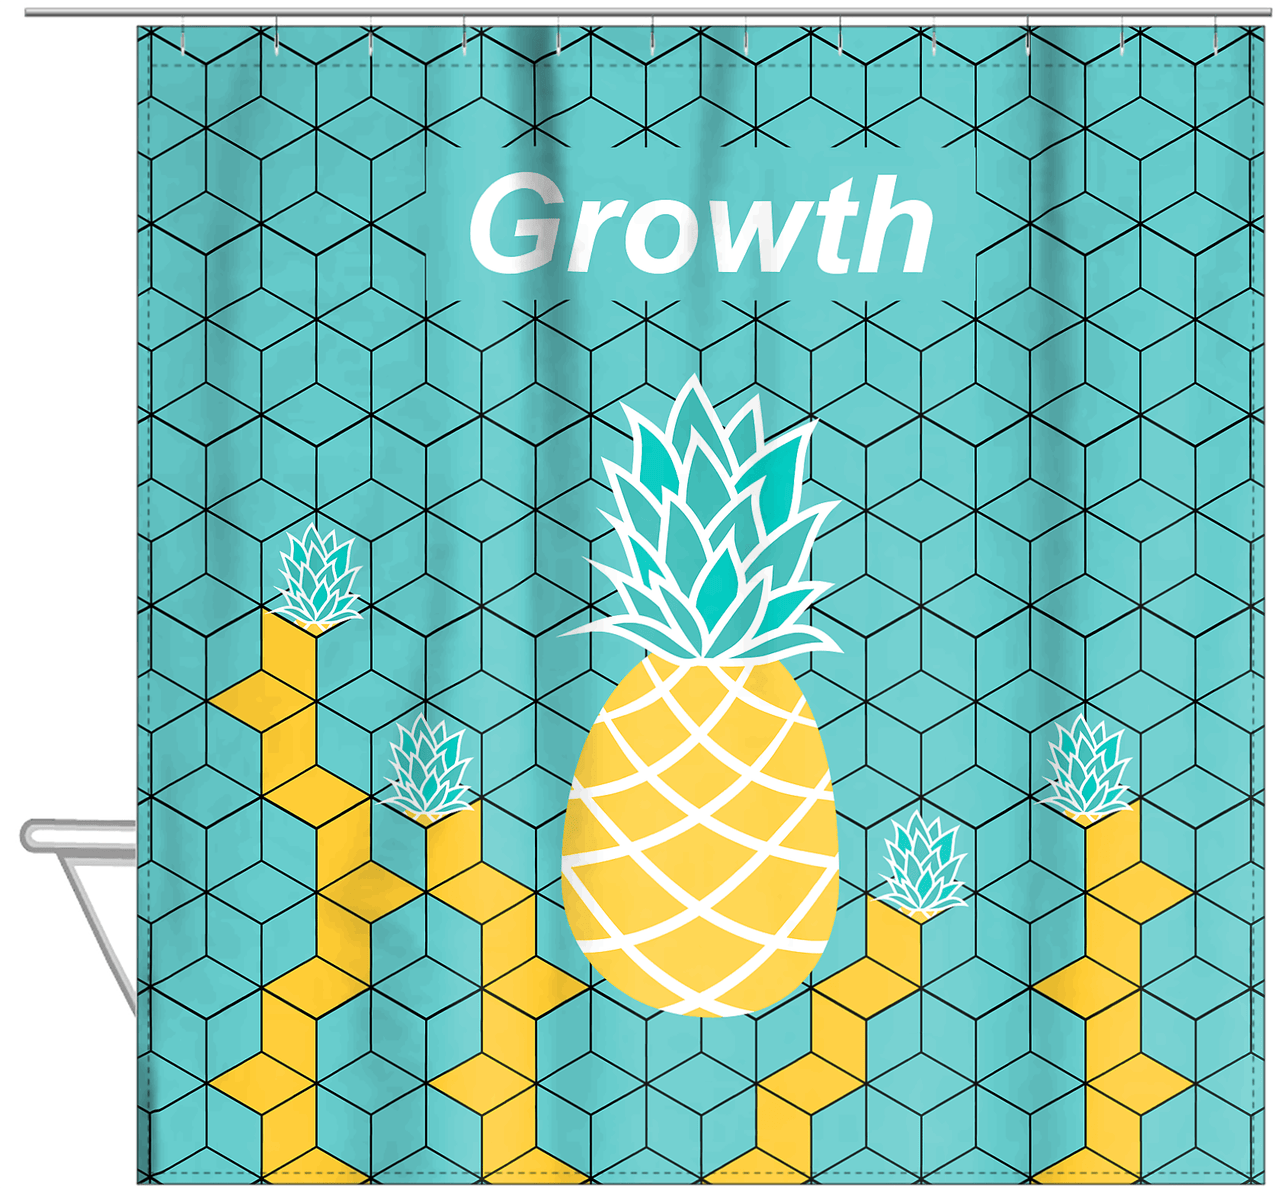 Personalized Pineapple Shower Curtain - Steps to Growth - Hanging View